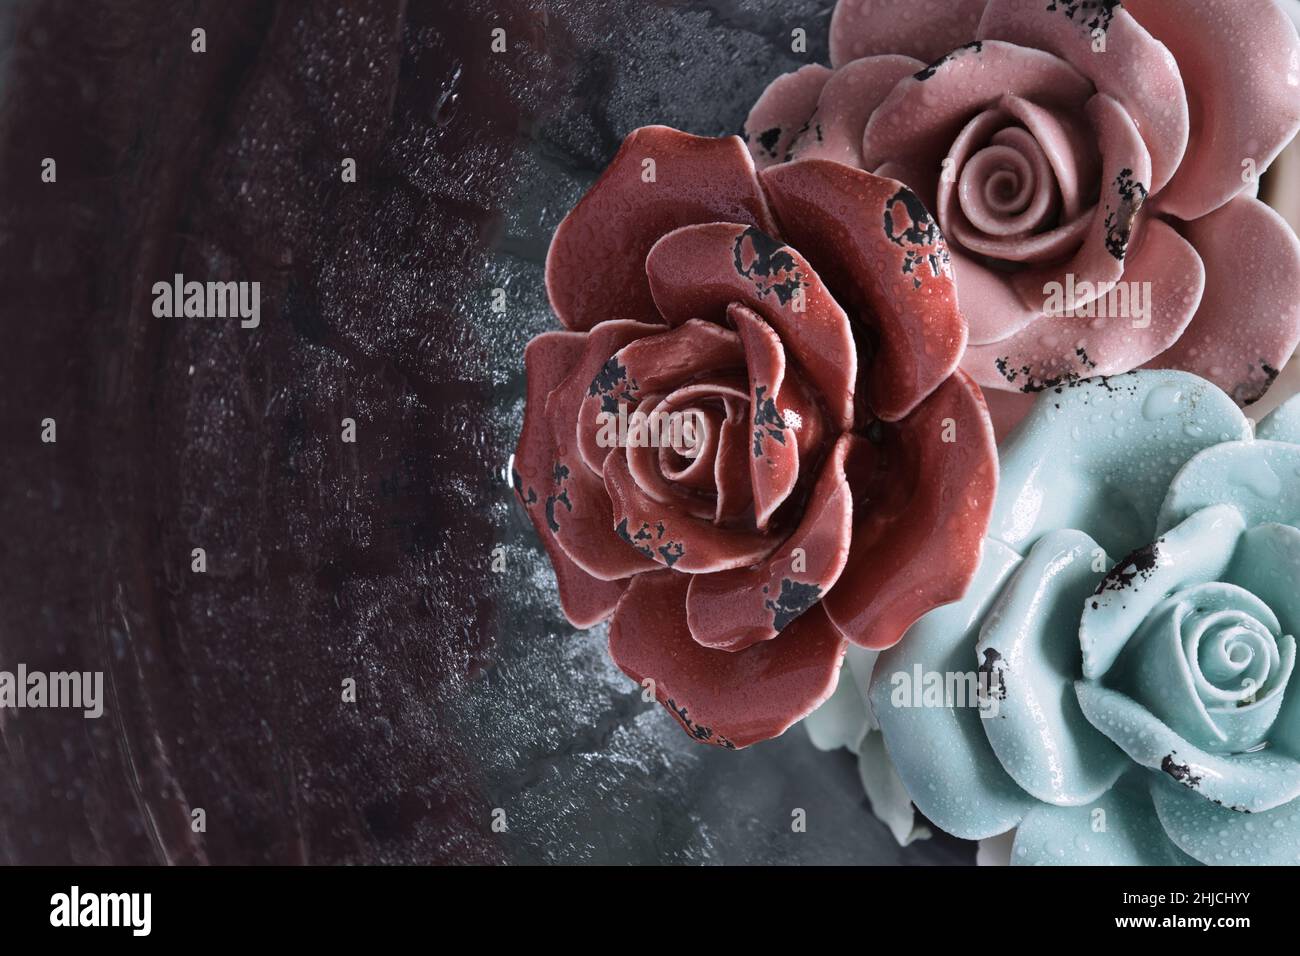 Ceramic Roses in Glass Vase with Waterdrops Stock Photo